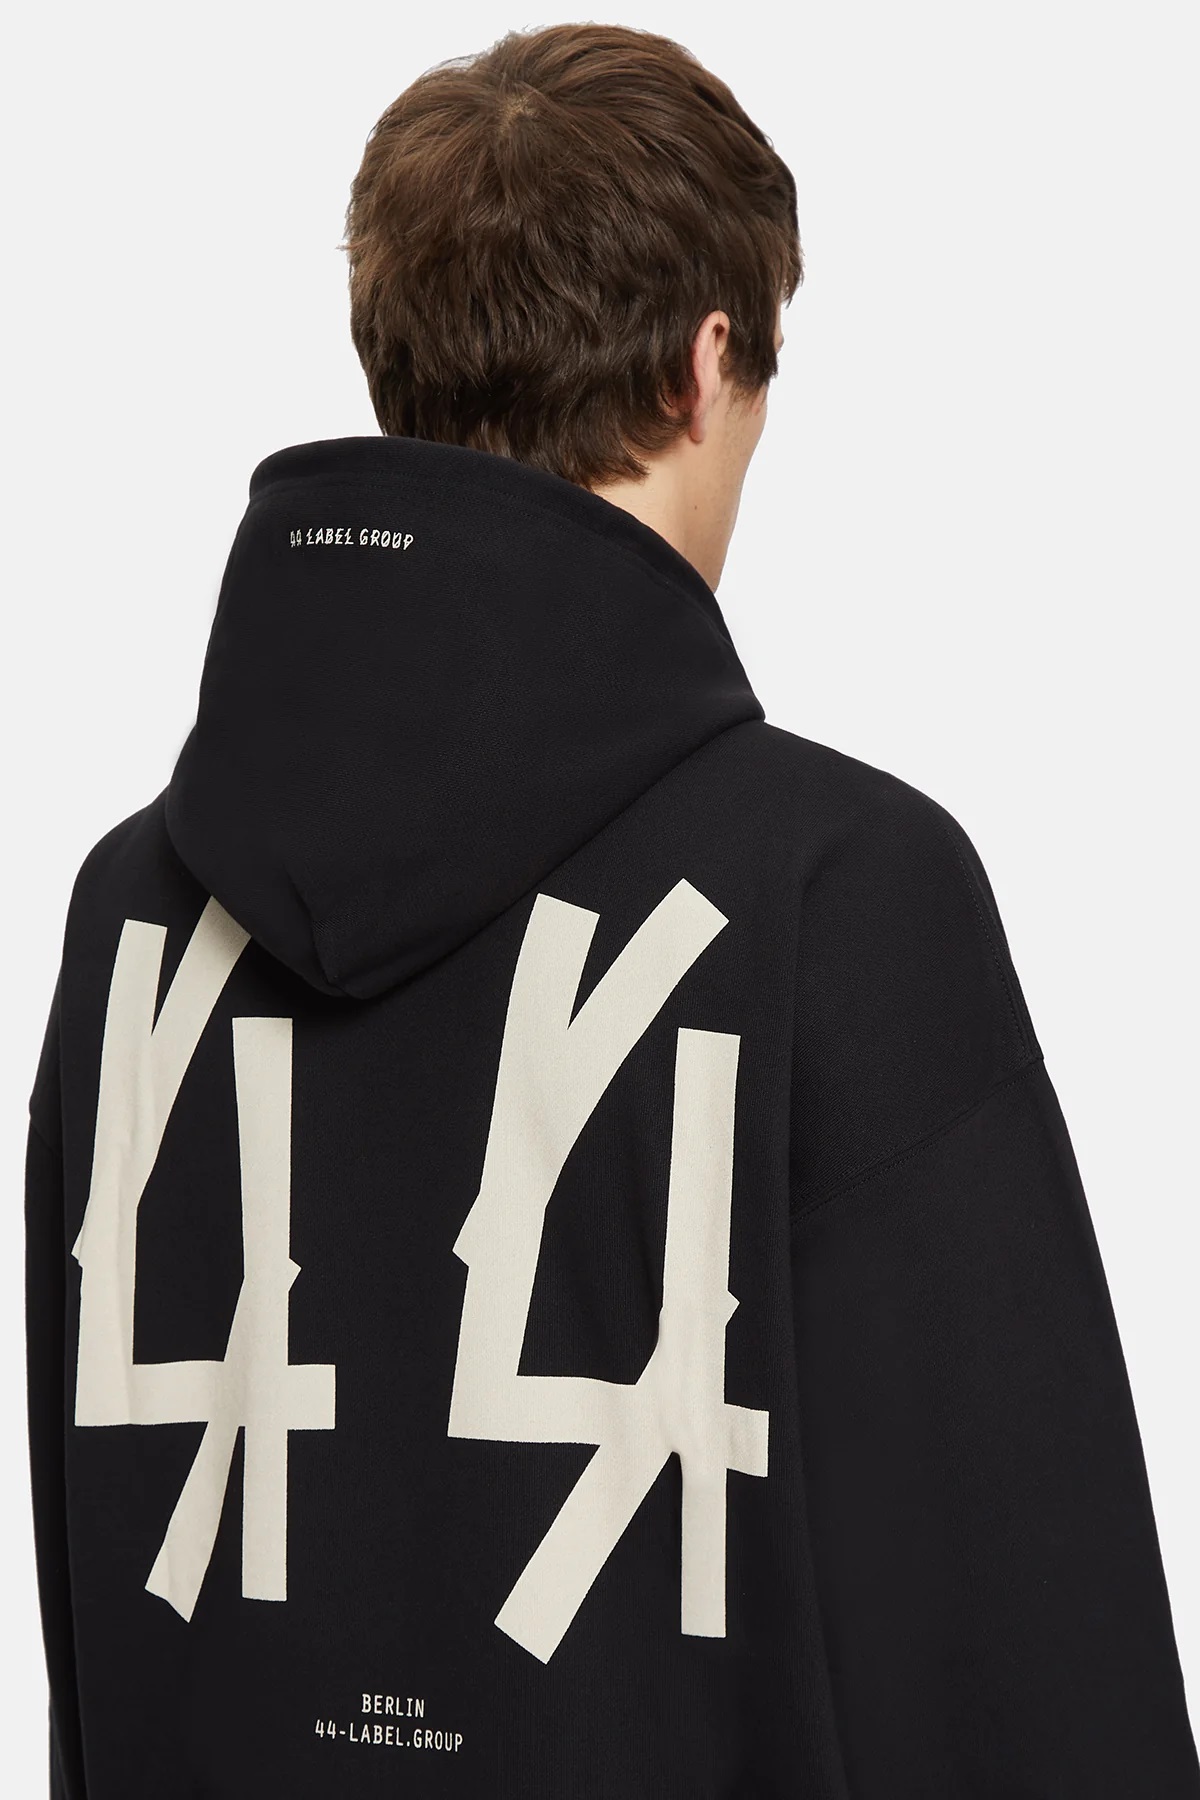 44 LABEL GROUP New Classic Hoodie in Black/Dirty White 2XL